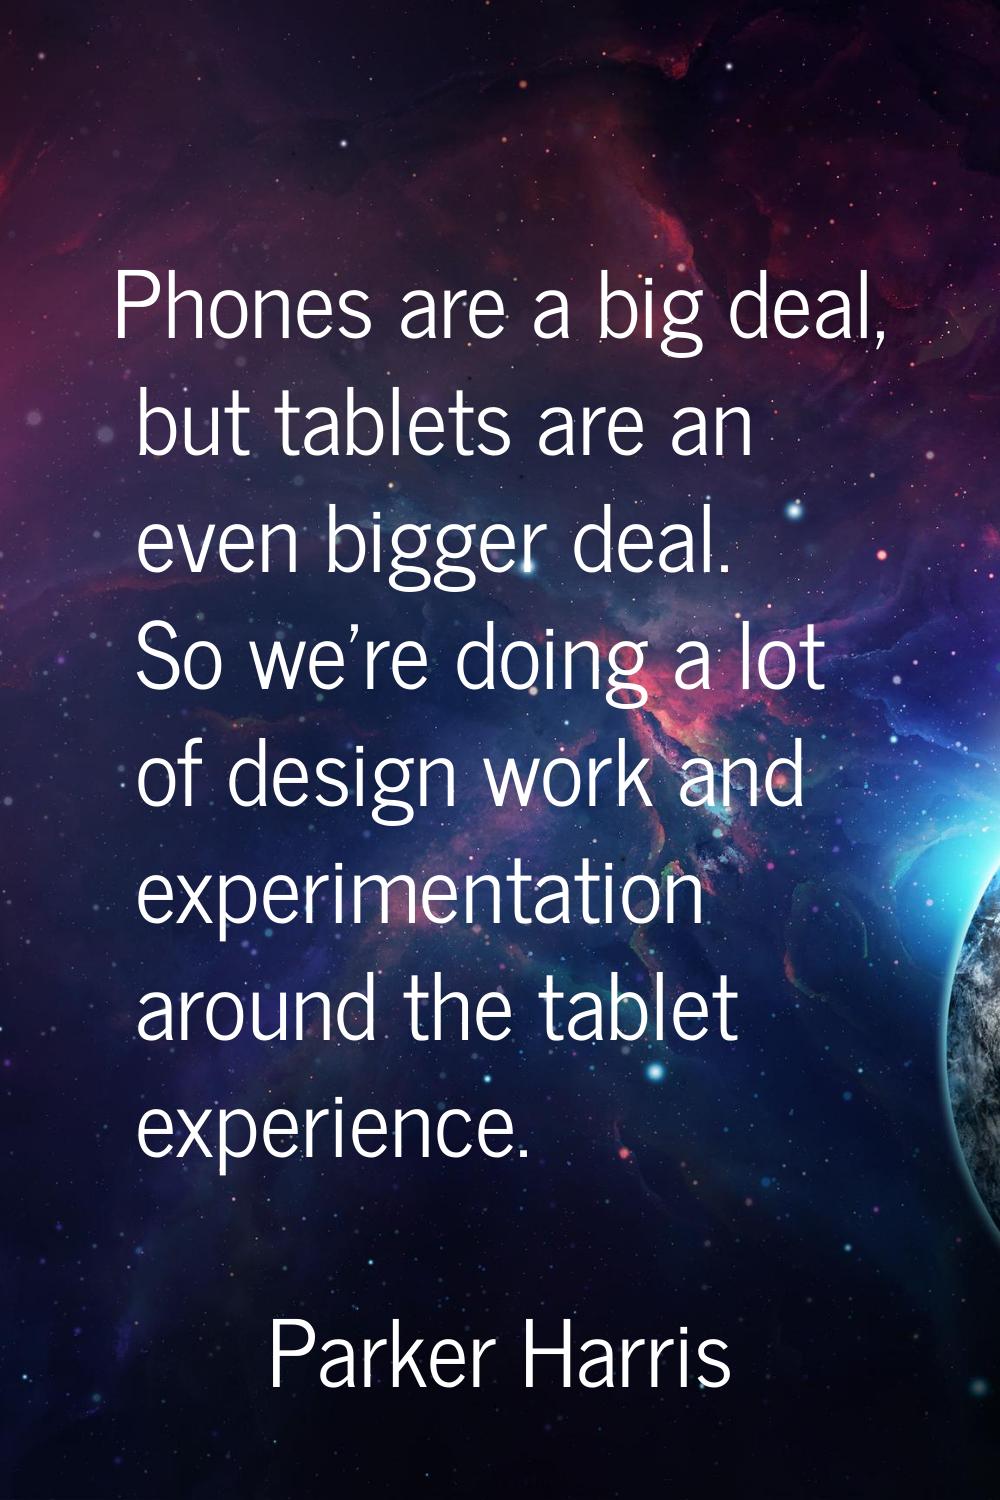 Phones are a big deal, but tablets are an even bigger deal. So we're doing a lot of design work and